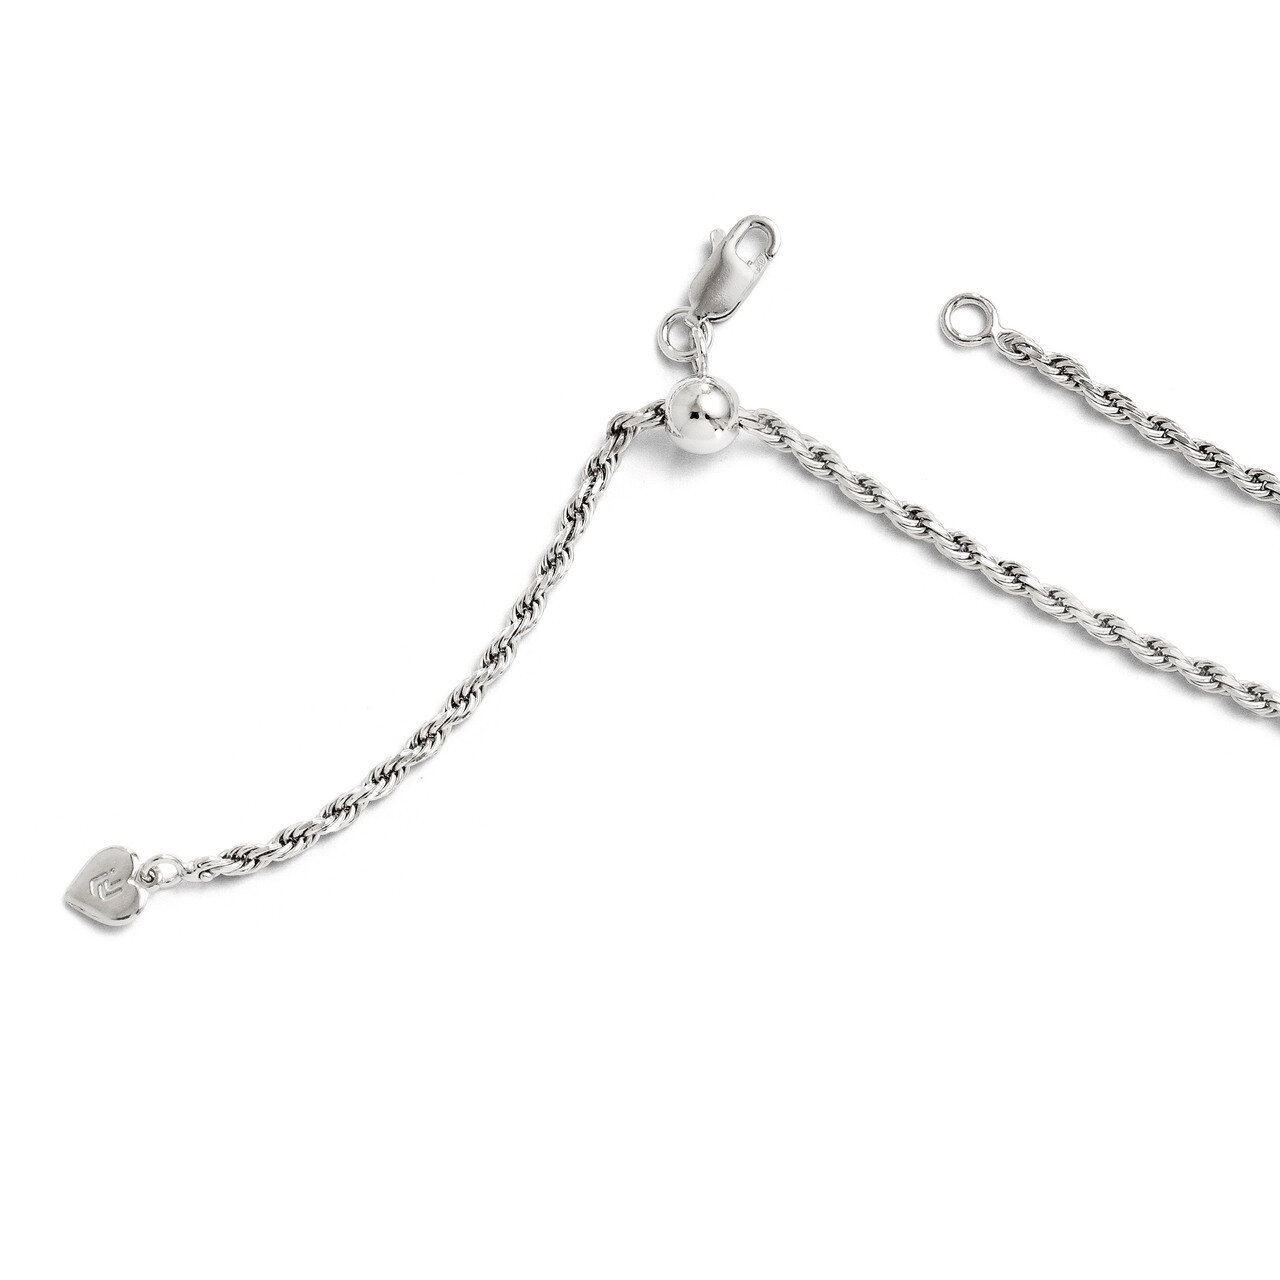 Adjustable Rope Chain 22 Inch - Sterling Silver HB-FC30-22